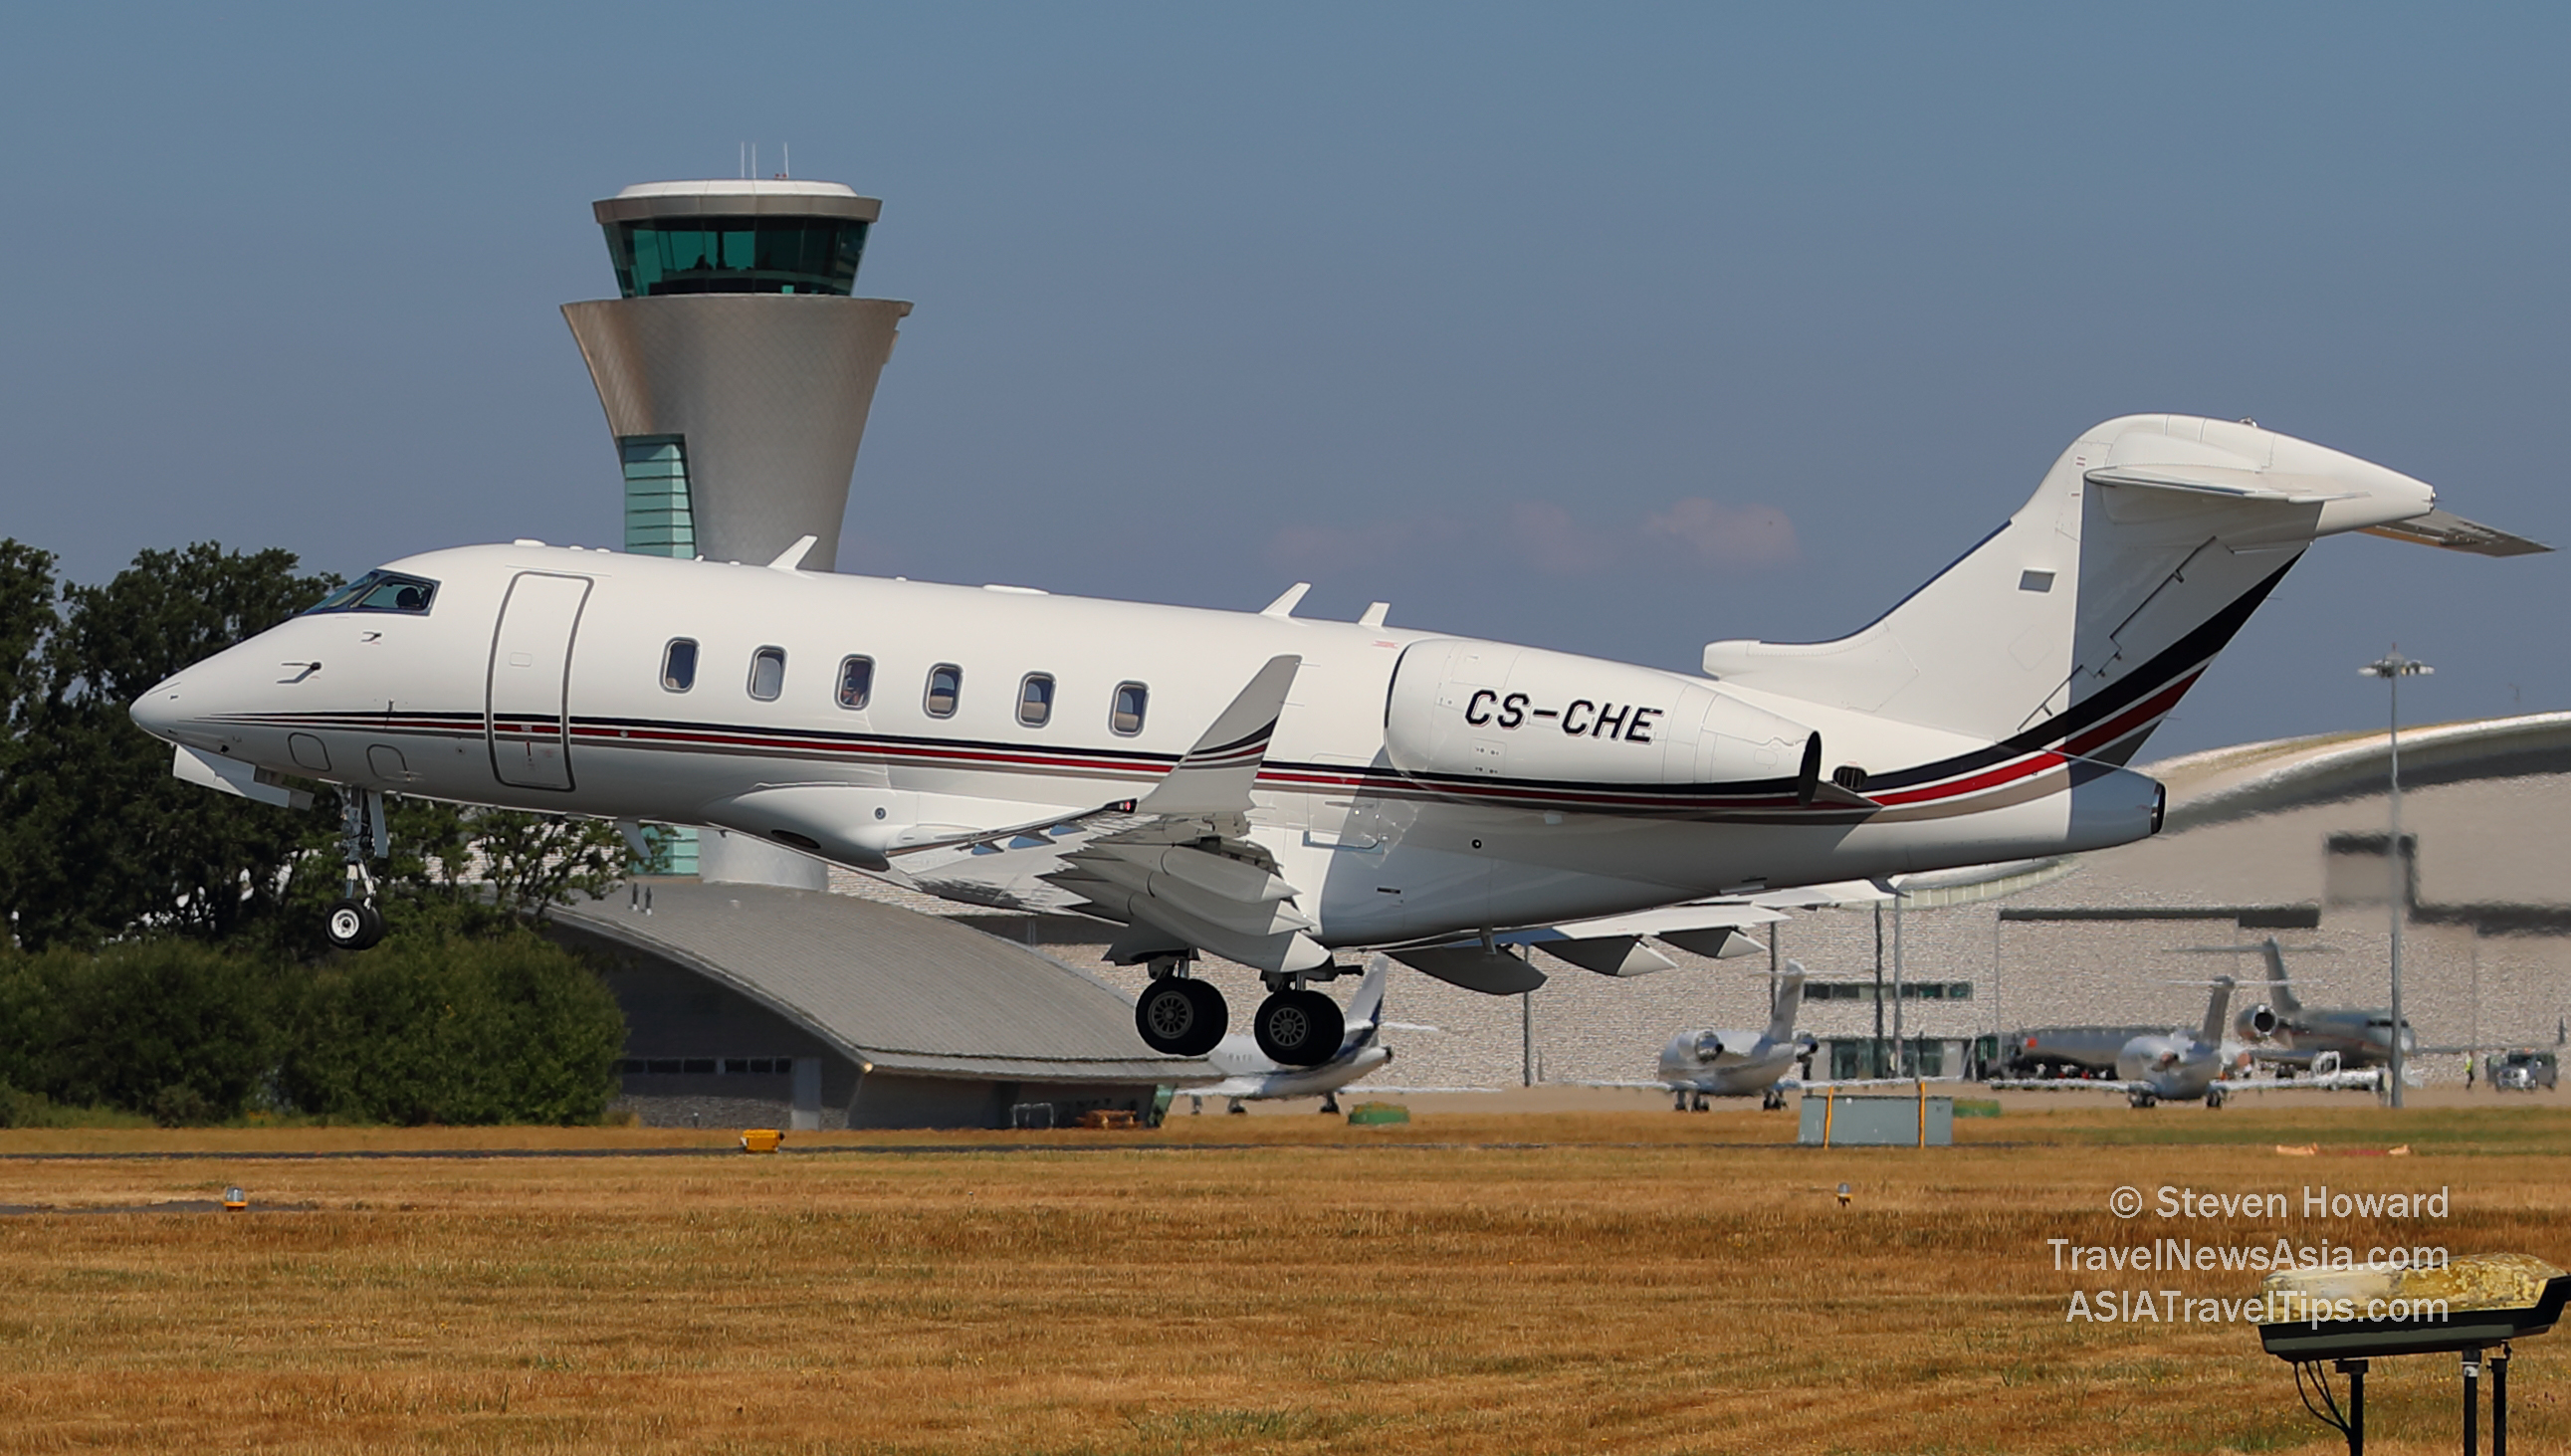 Bombardier Challenger 350 reg: CS-CHE performing a demonstration flight at Farnborough Airshow 2018. Picture by Steven Howard of TravelNewsAsia.com Click to enlarge.